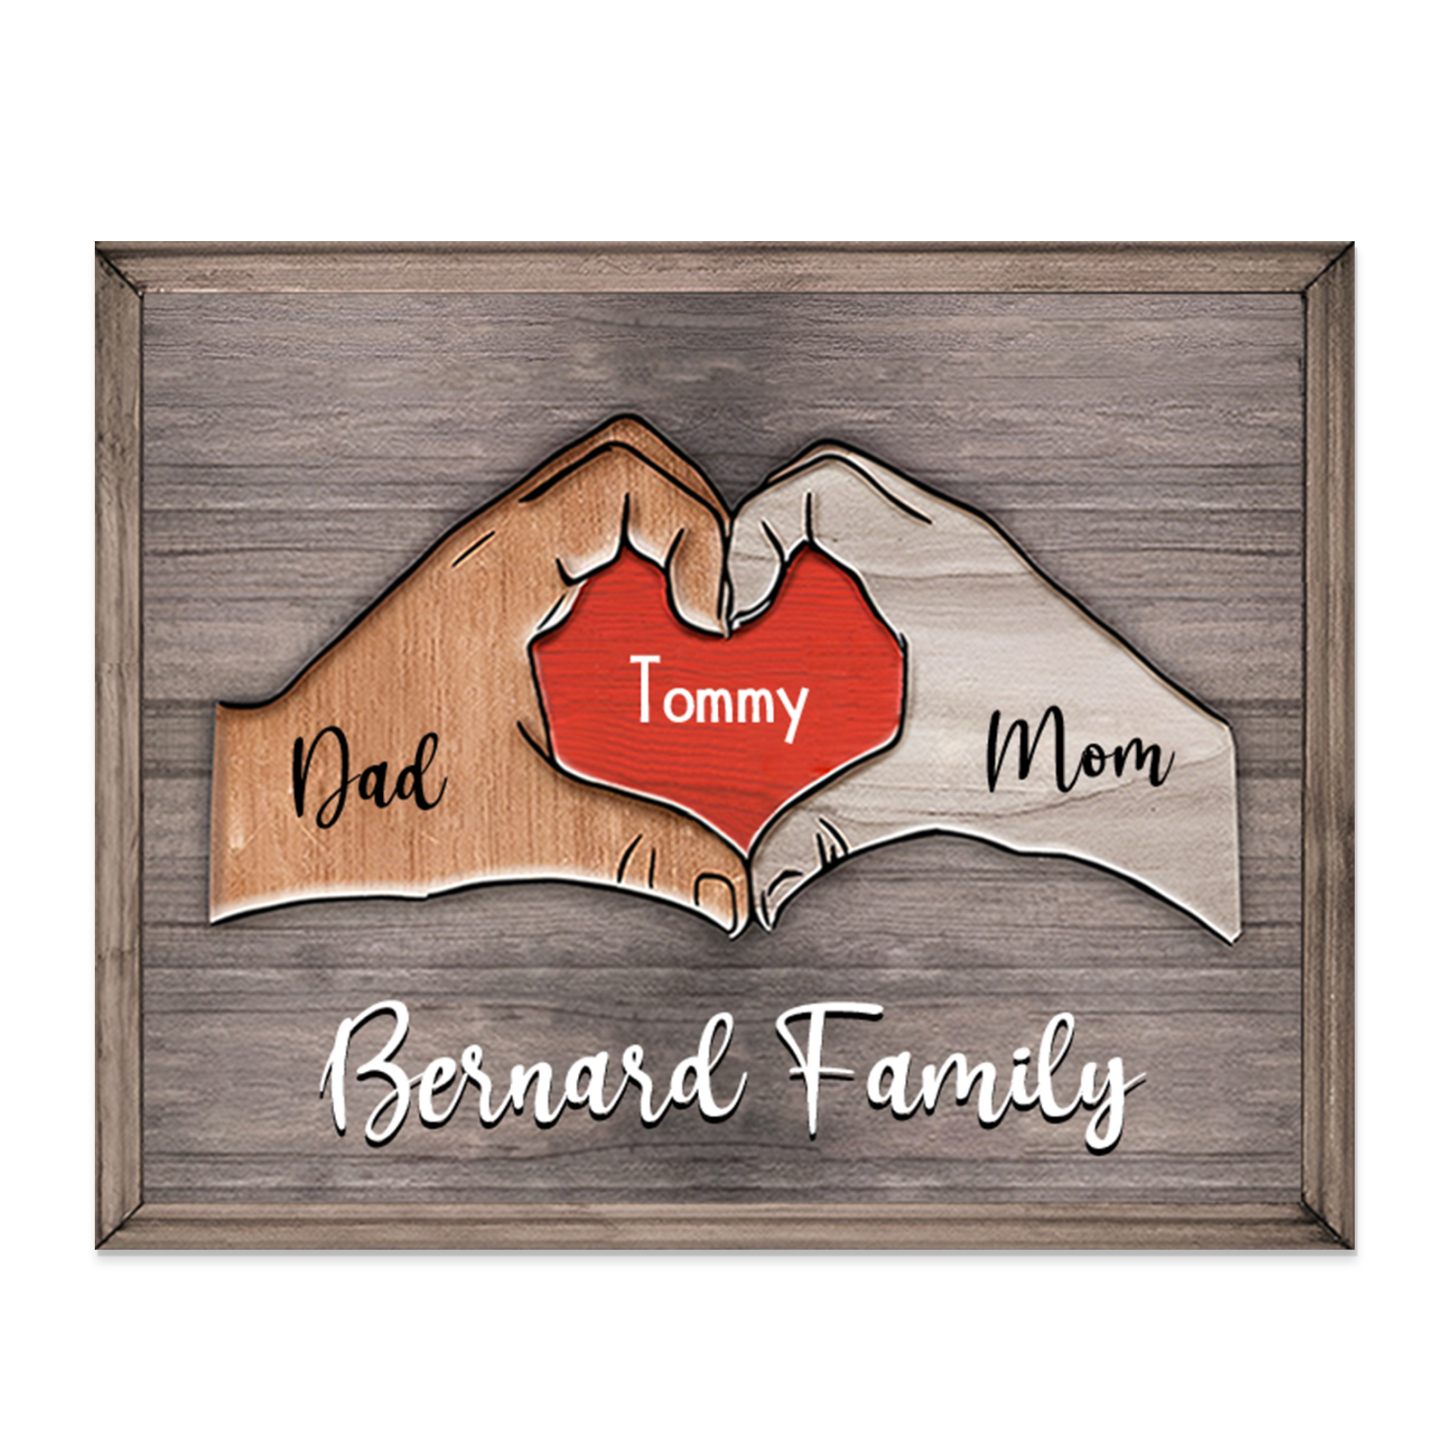 1 Name - Personalized Love Heart Customized Name and Text Wooden Ornament Father's Day Gift for Dad